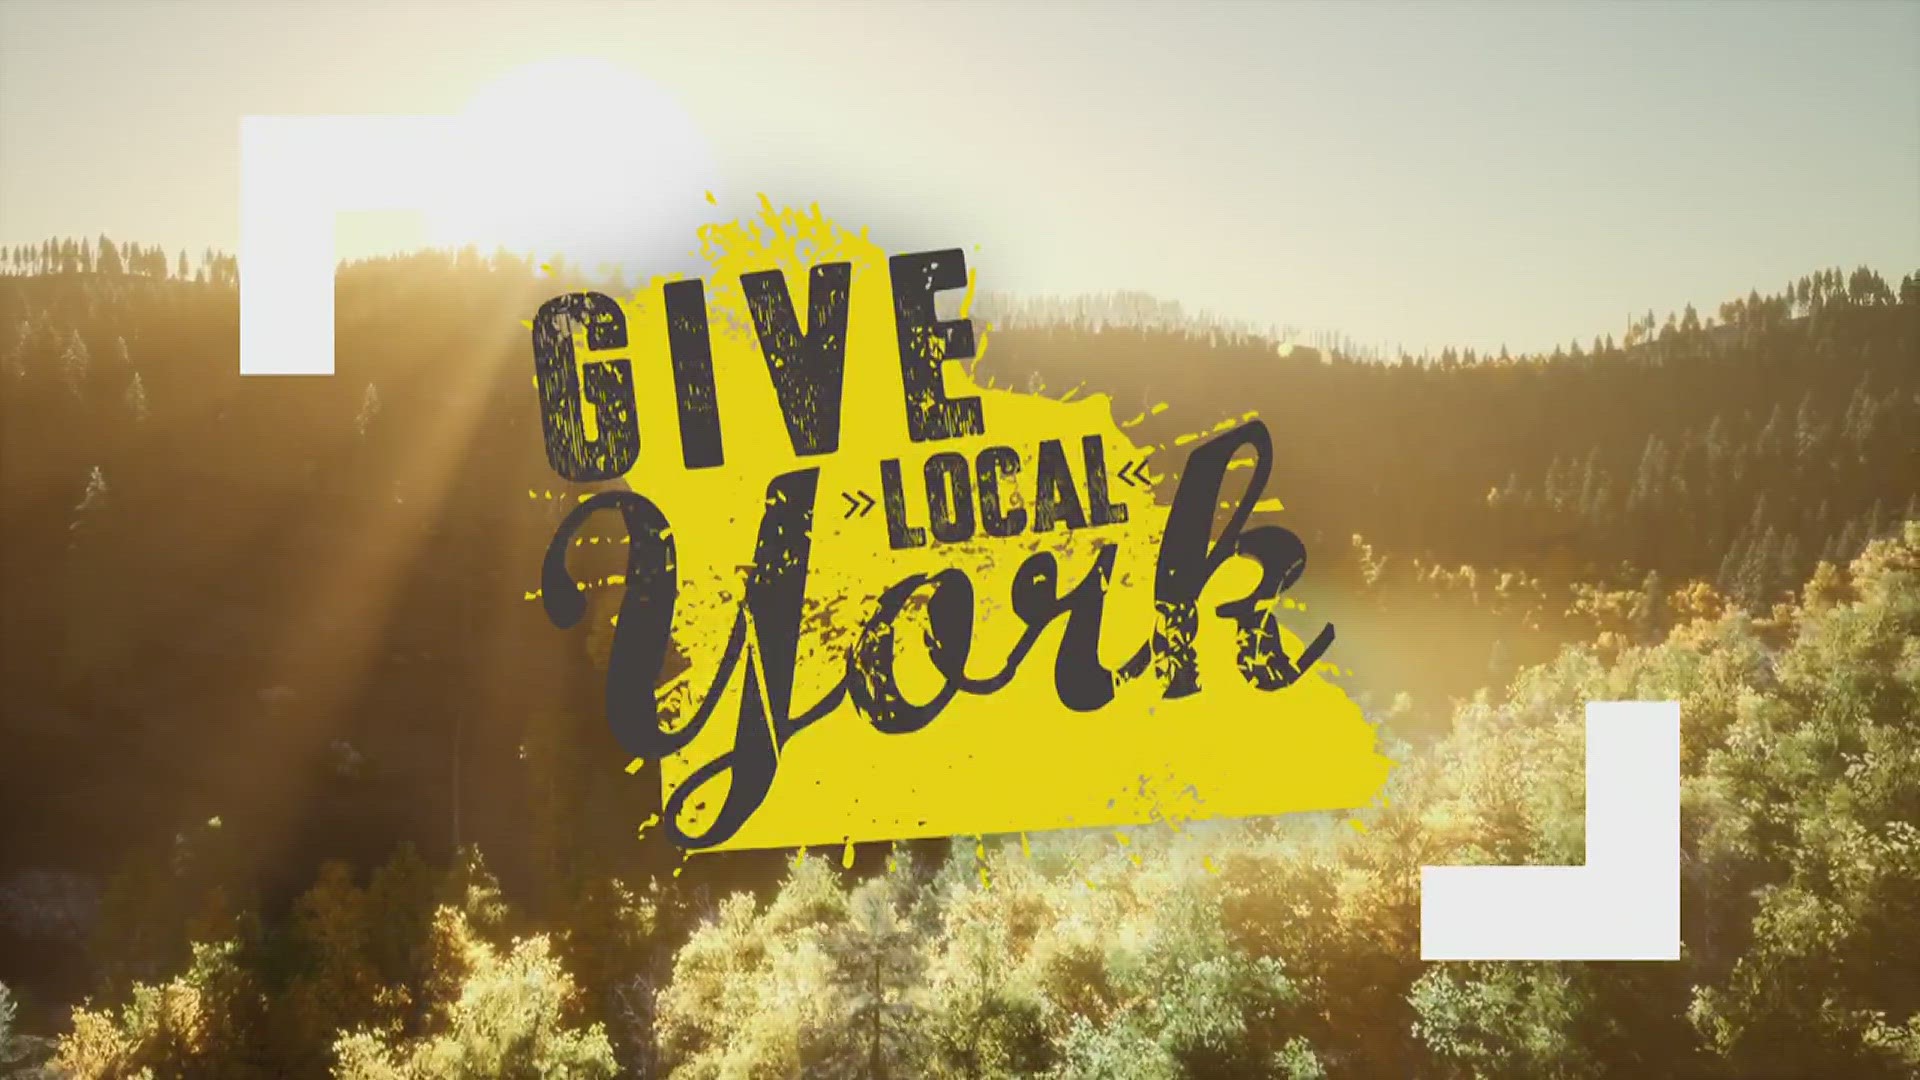 Give Local York is 24-hour period of philanthropy designed to support the nonprofits helping people right in your own community. It kicks off at 9 p.m. today.